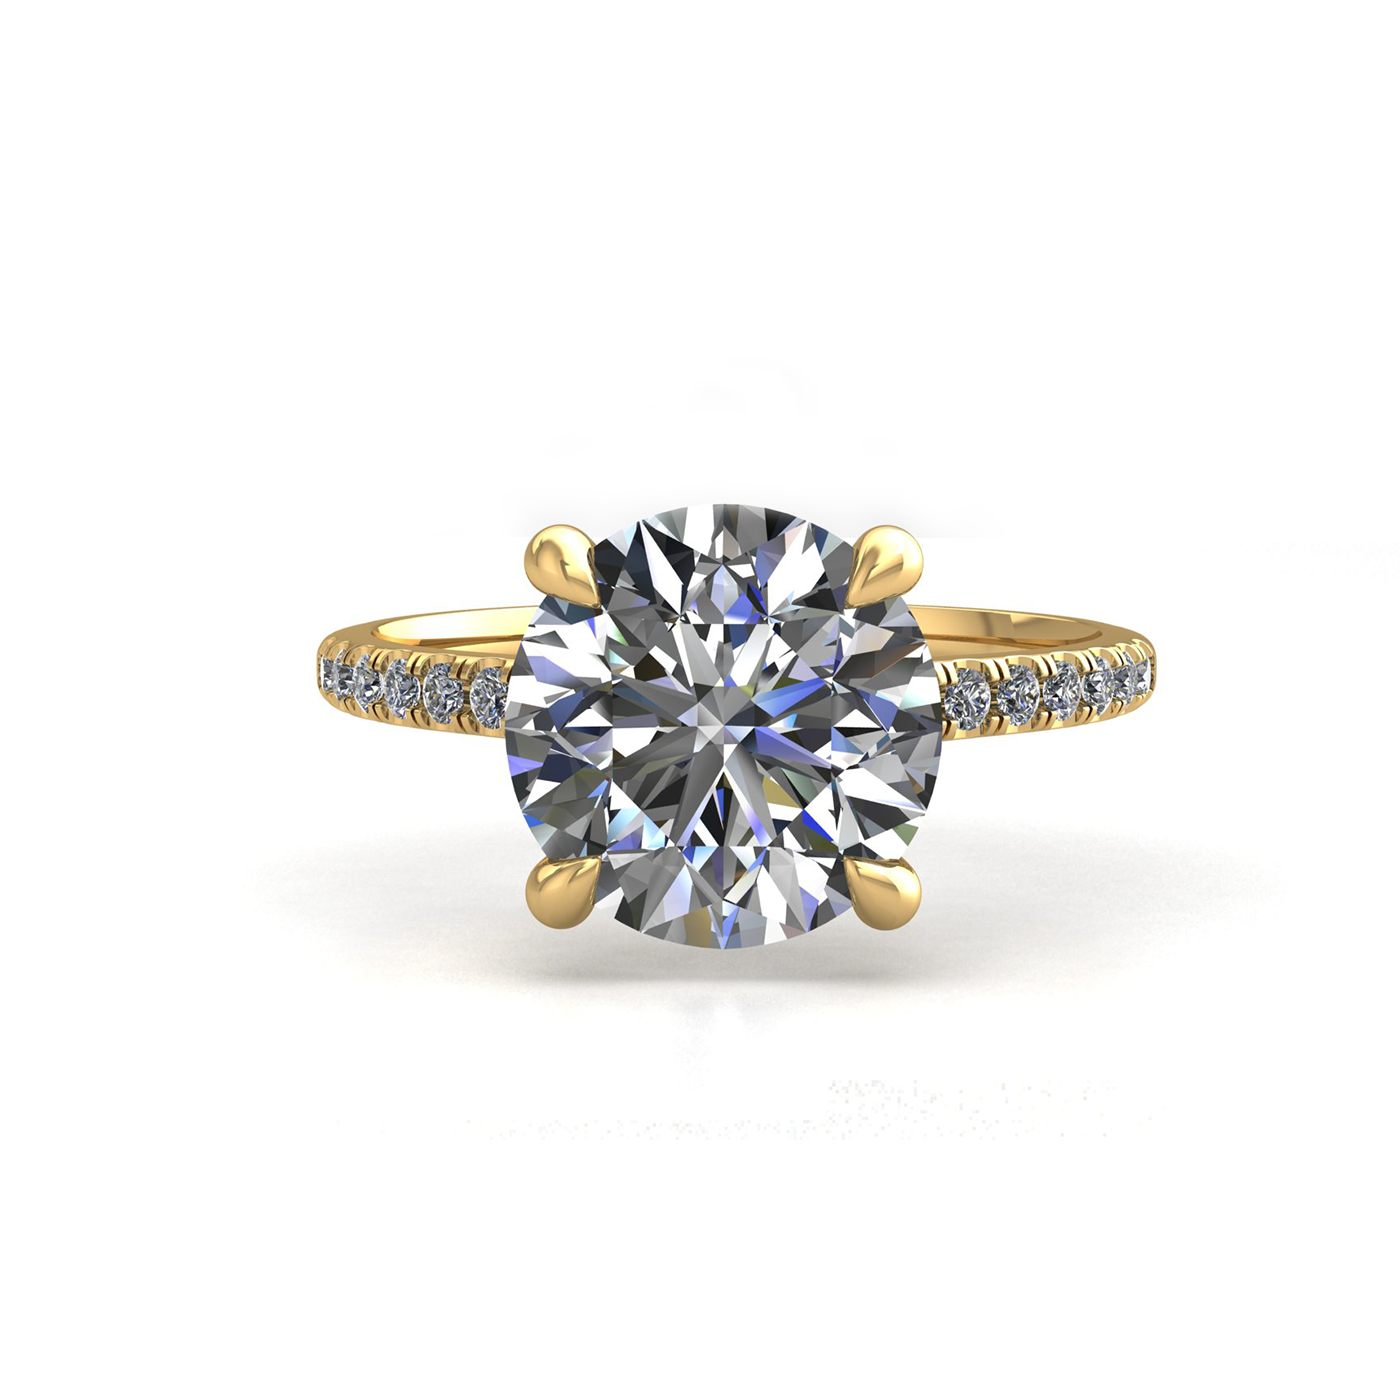 18k yellow gold 0,50 ct 4 prongs round cut diamond engagement ring with whisper thin pavÉ set band Photos & images